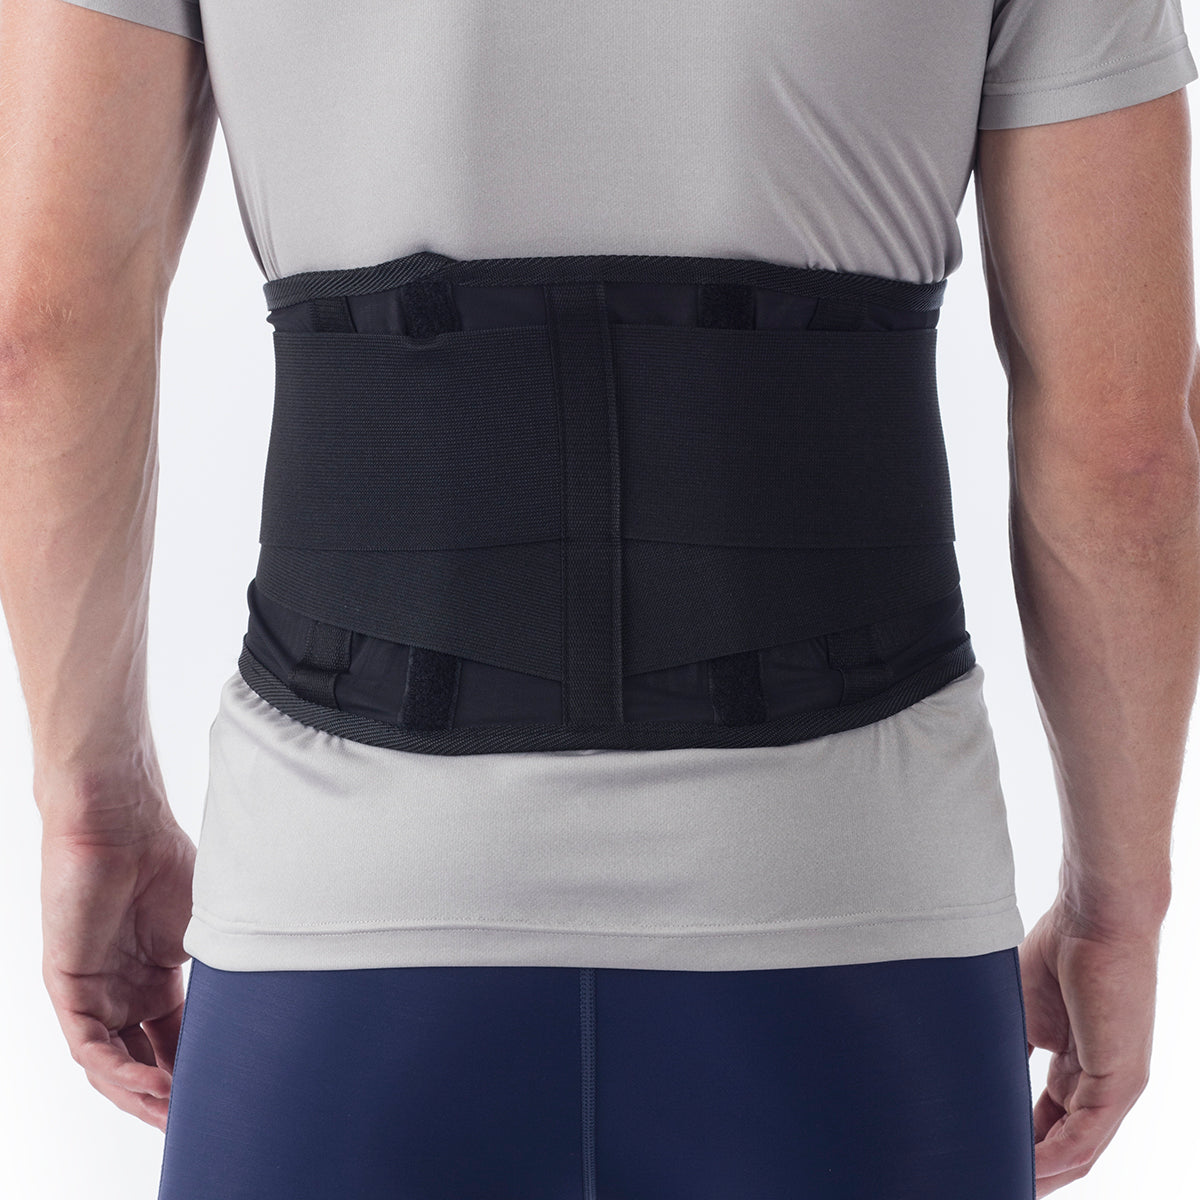 Breathable Spandex Back Belt, Small, Fits Waist 26" - 30"